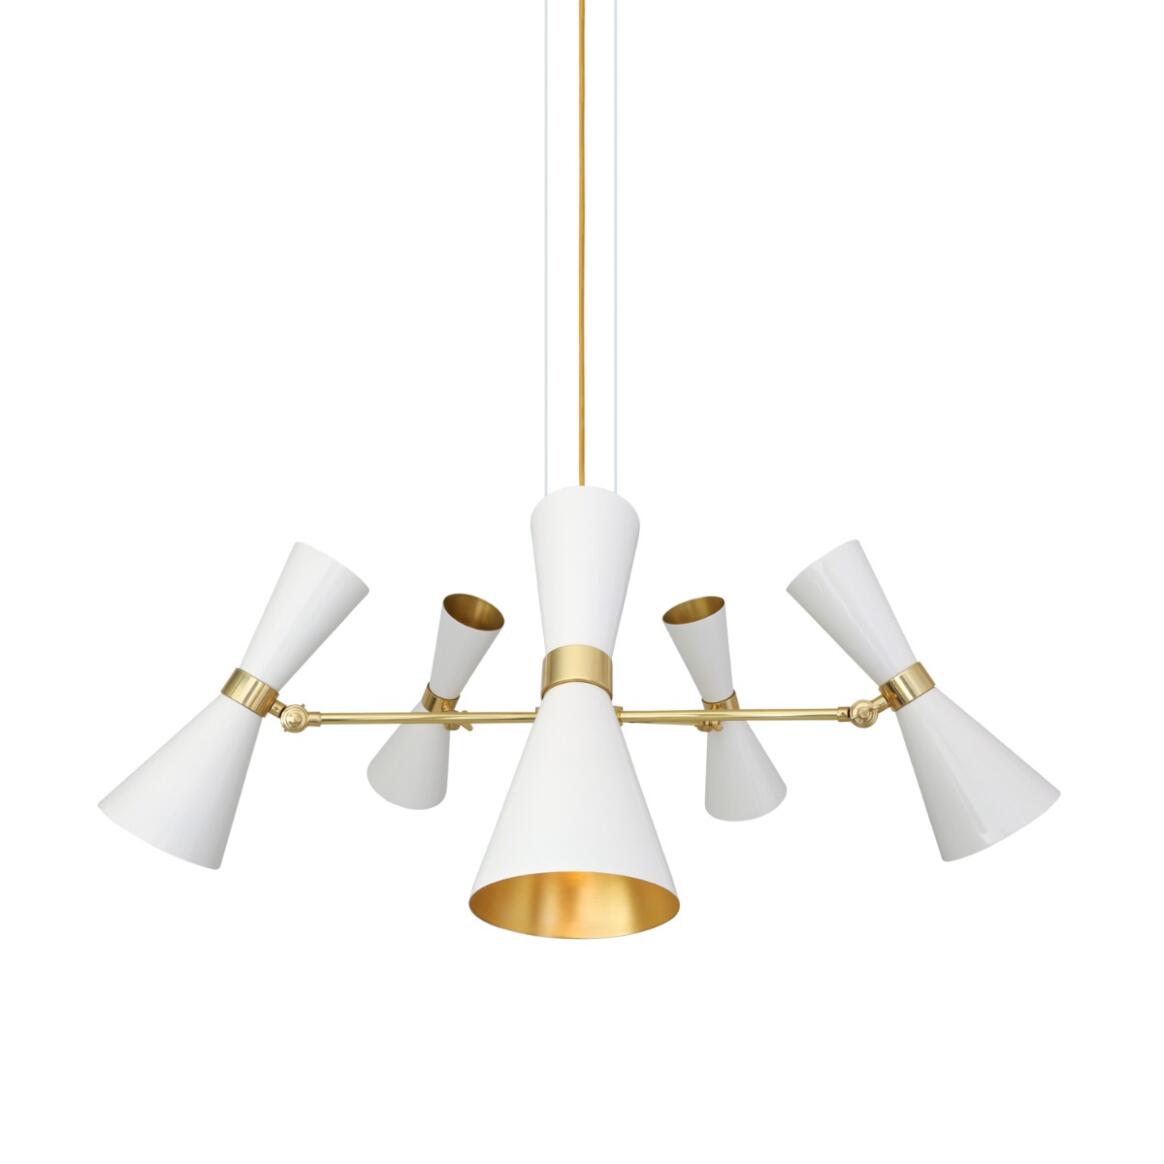 Cairo Mid-Century Chandelier, Five-Arm main product image